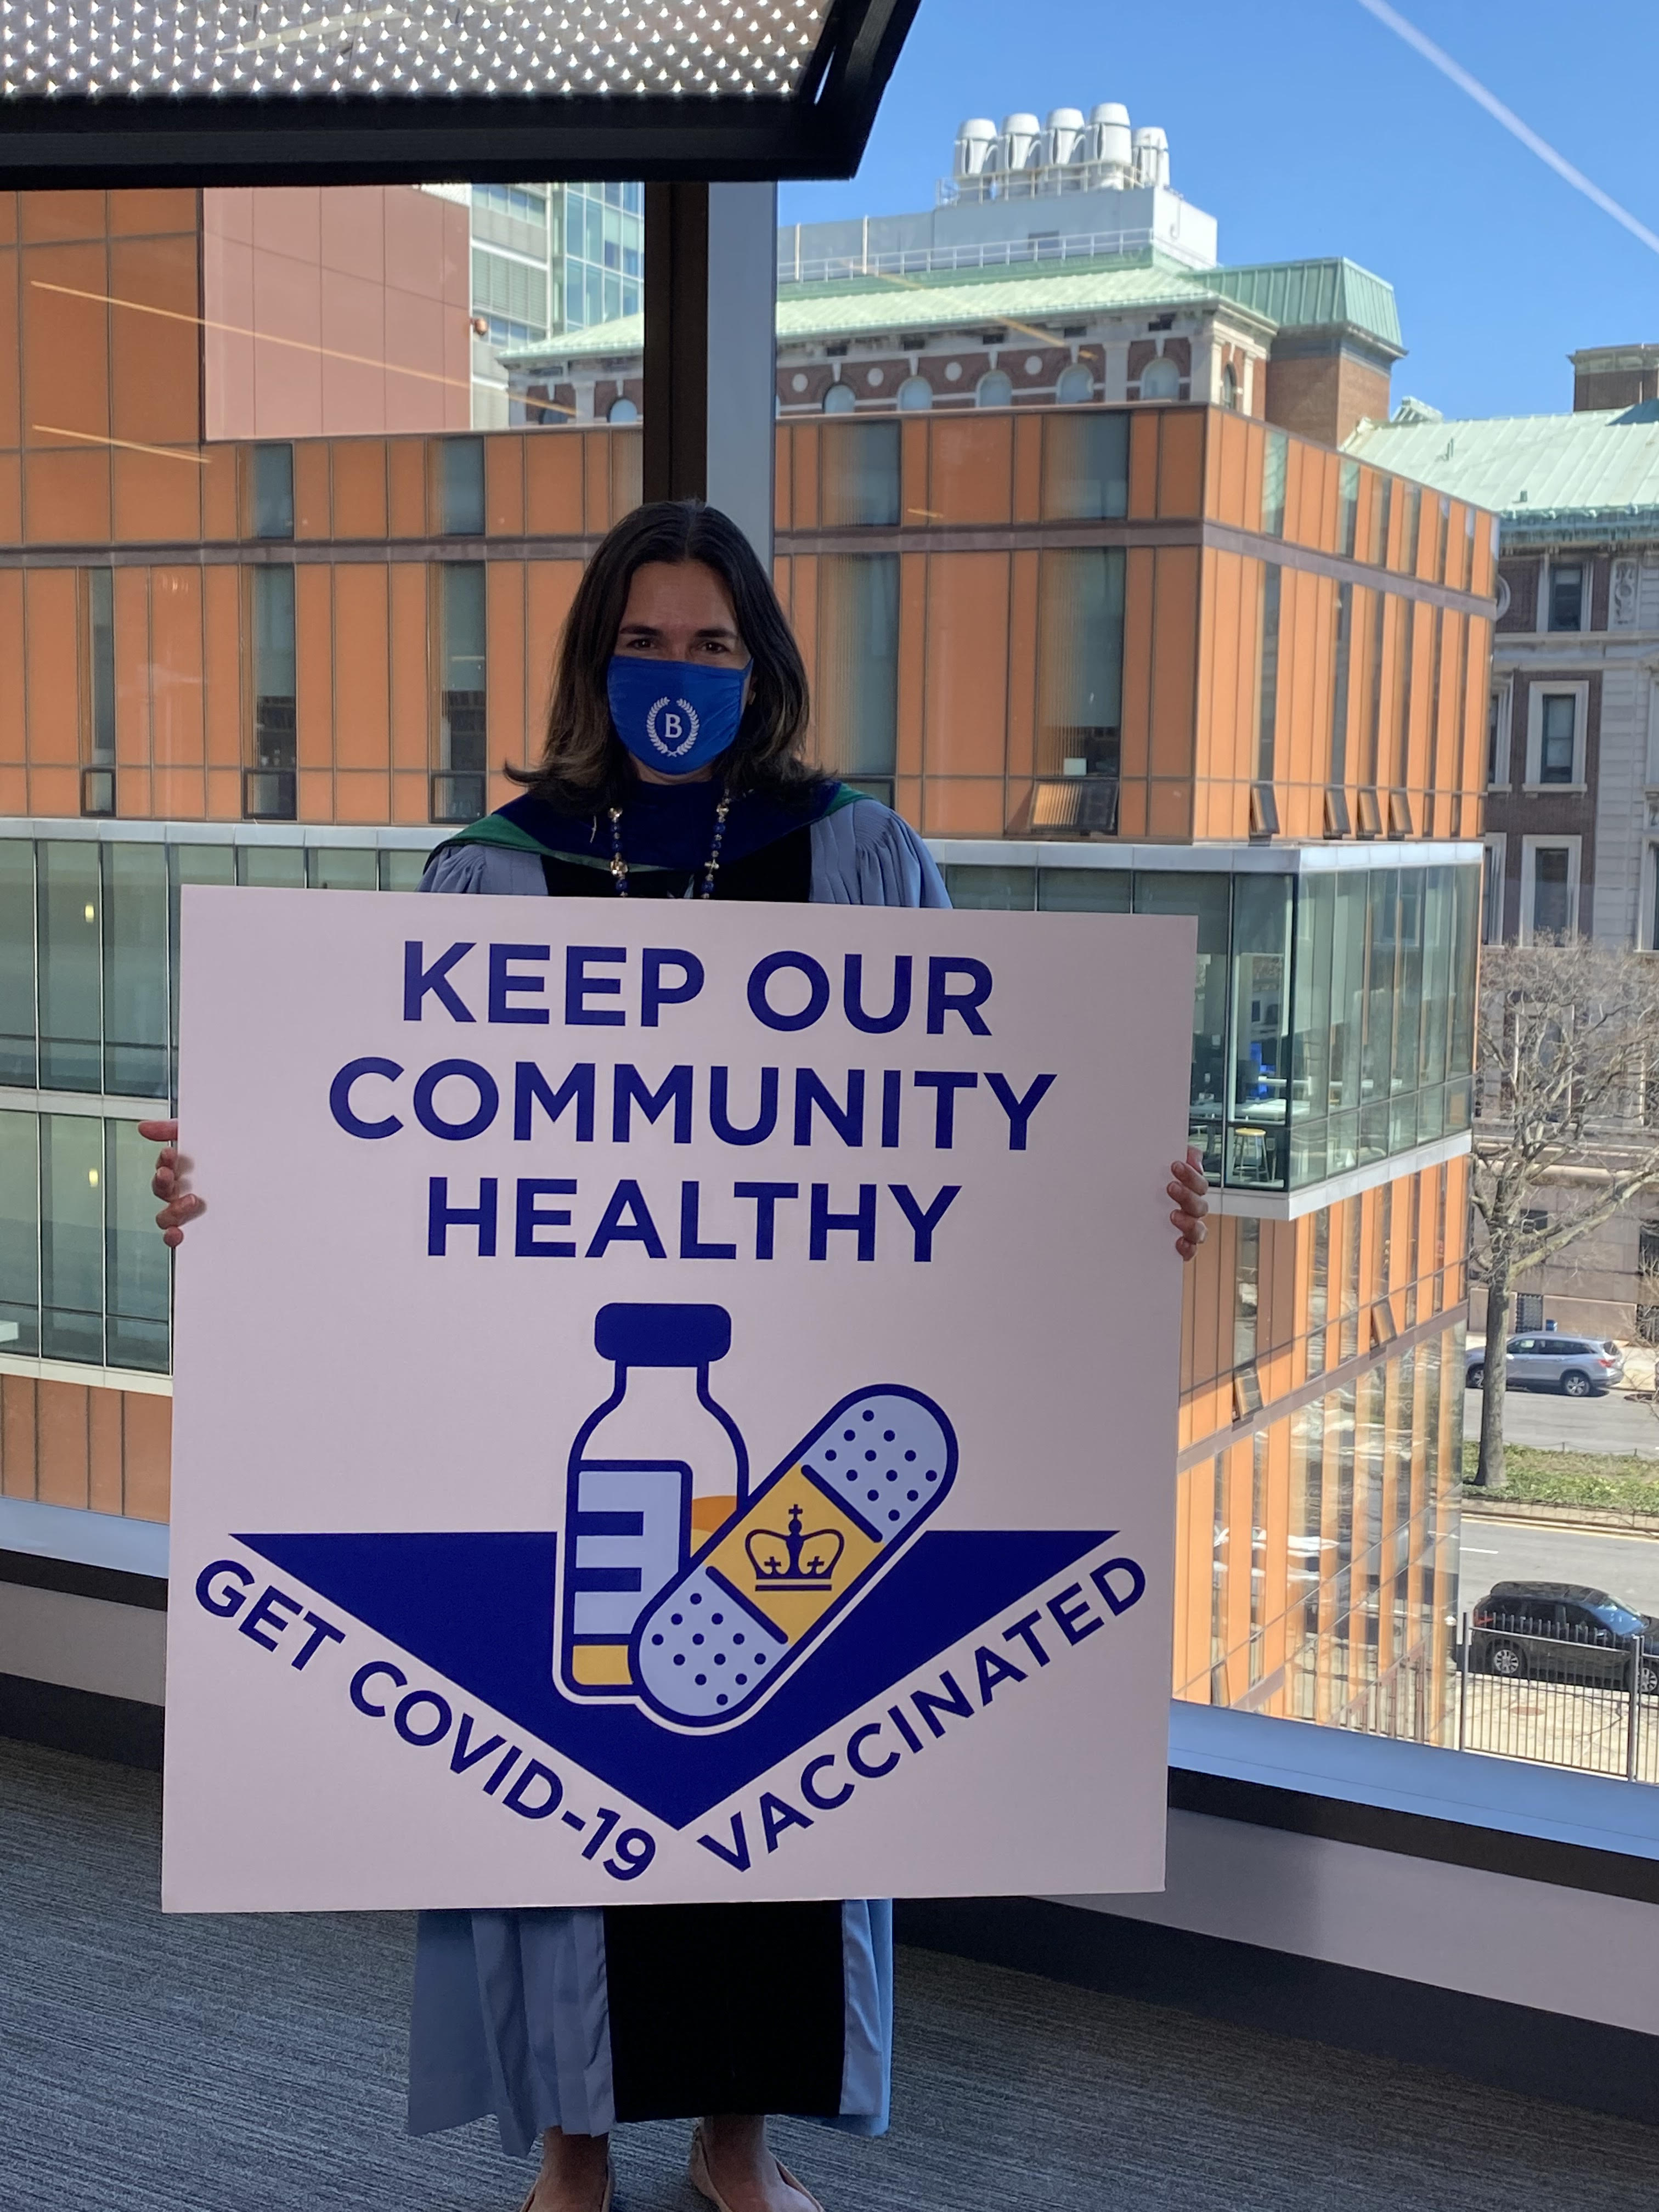 President Beilock holding a sign that says "Keep Our Community Safe. Get COVID-19 Vaccinated."